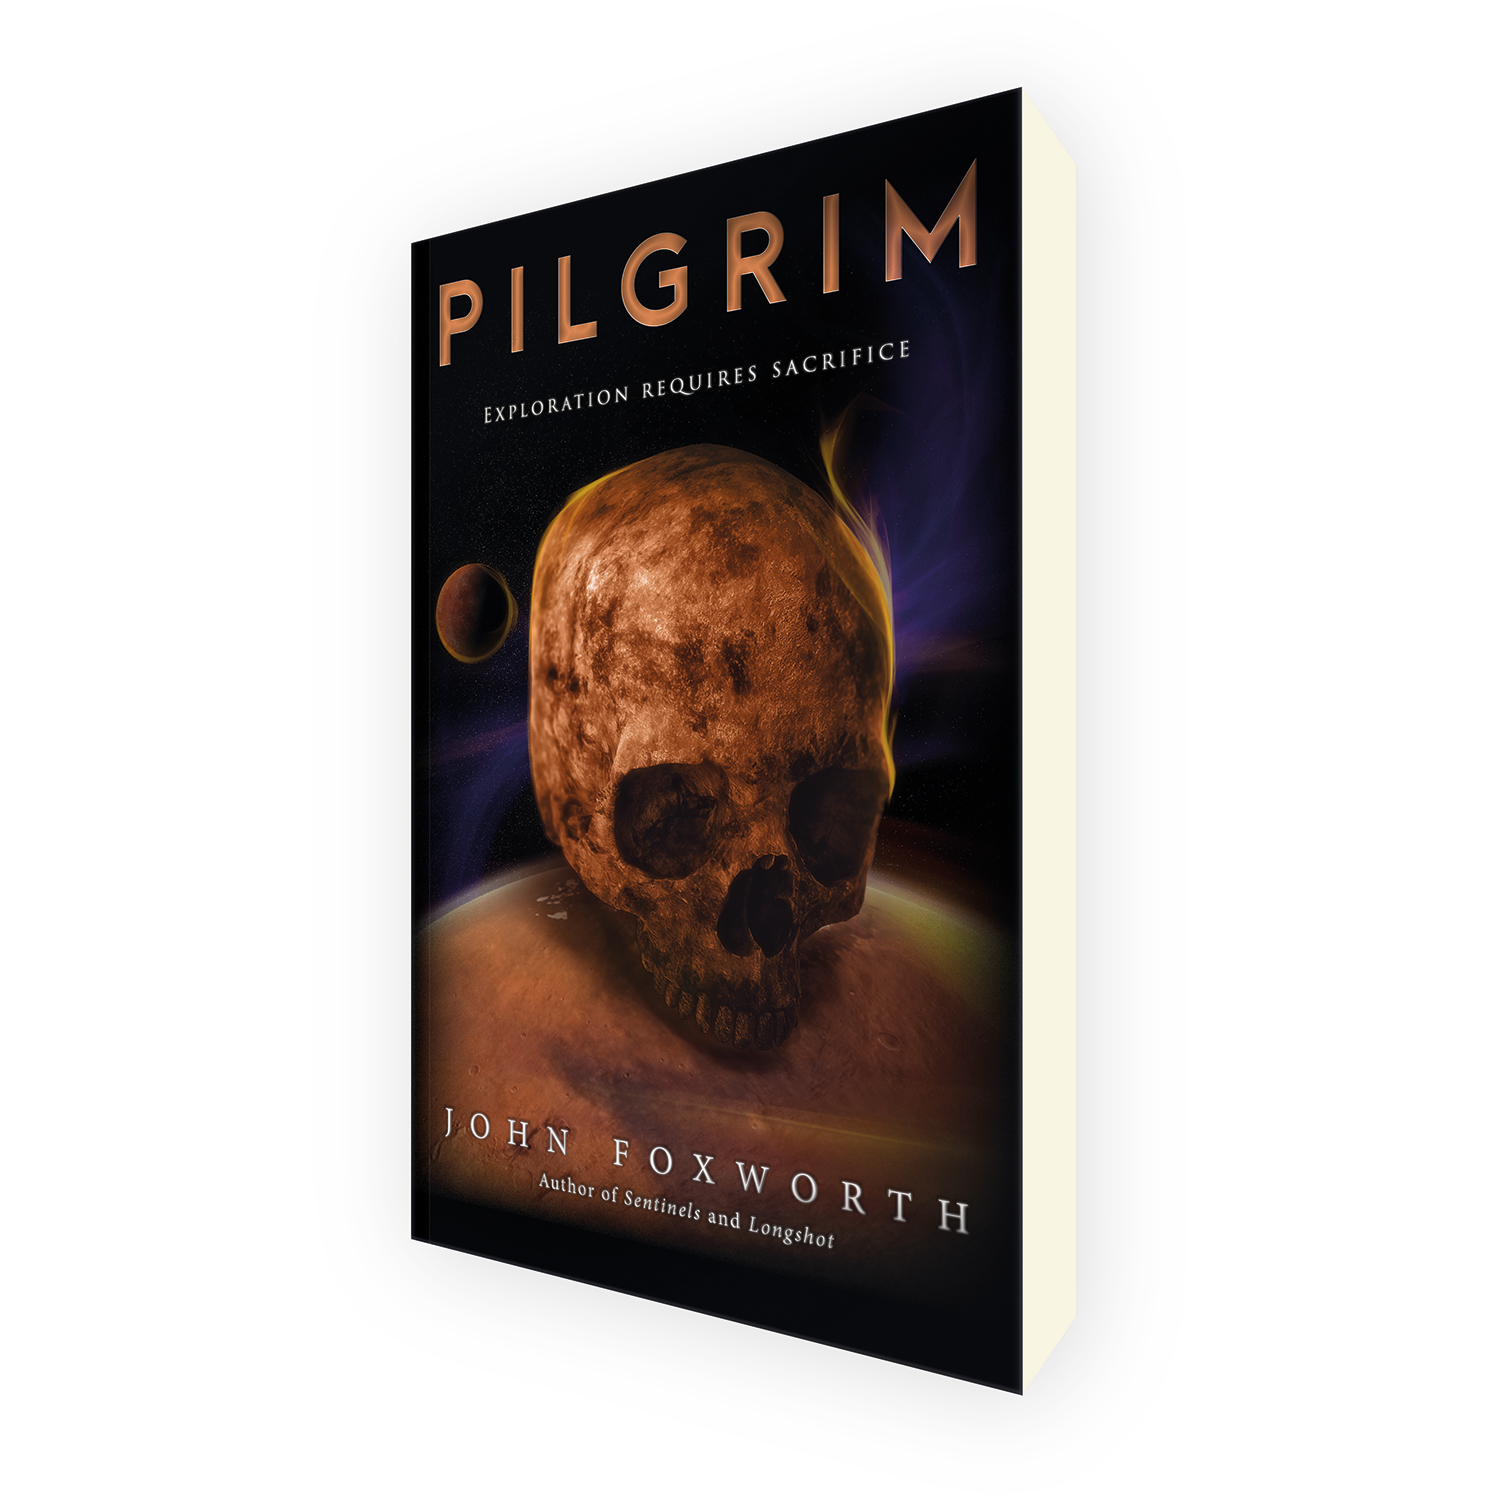 'Pilgrim' is a bespoke cover design for a modern deep-space scifi novel. The book cover was designed by Mark Thomas, of coverness.com. To find out more about my book design services, please visit www.coverness.com.